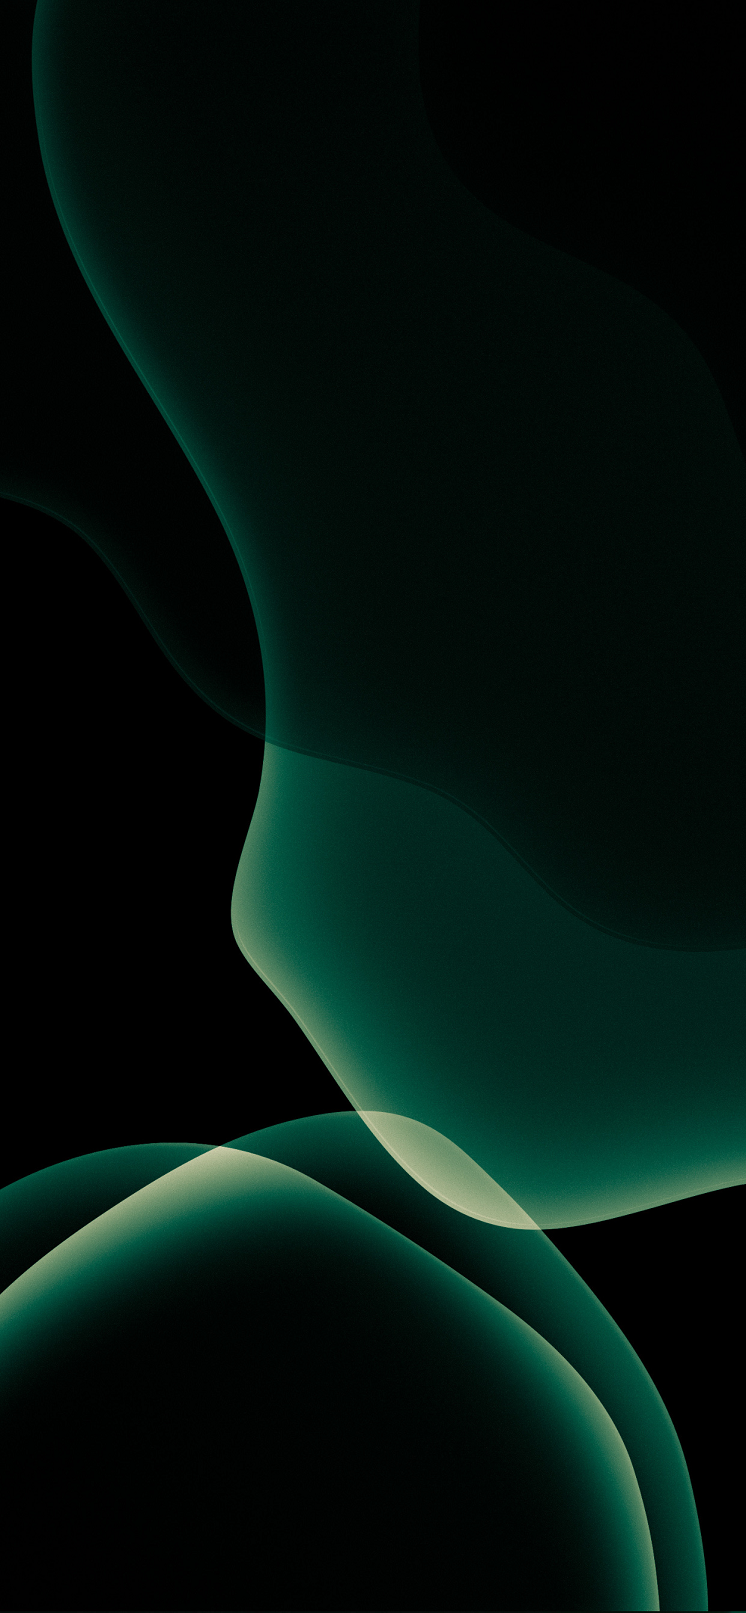 iOS-13-iPhone-11-Pro-wallpaper-inspired-ar72014